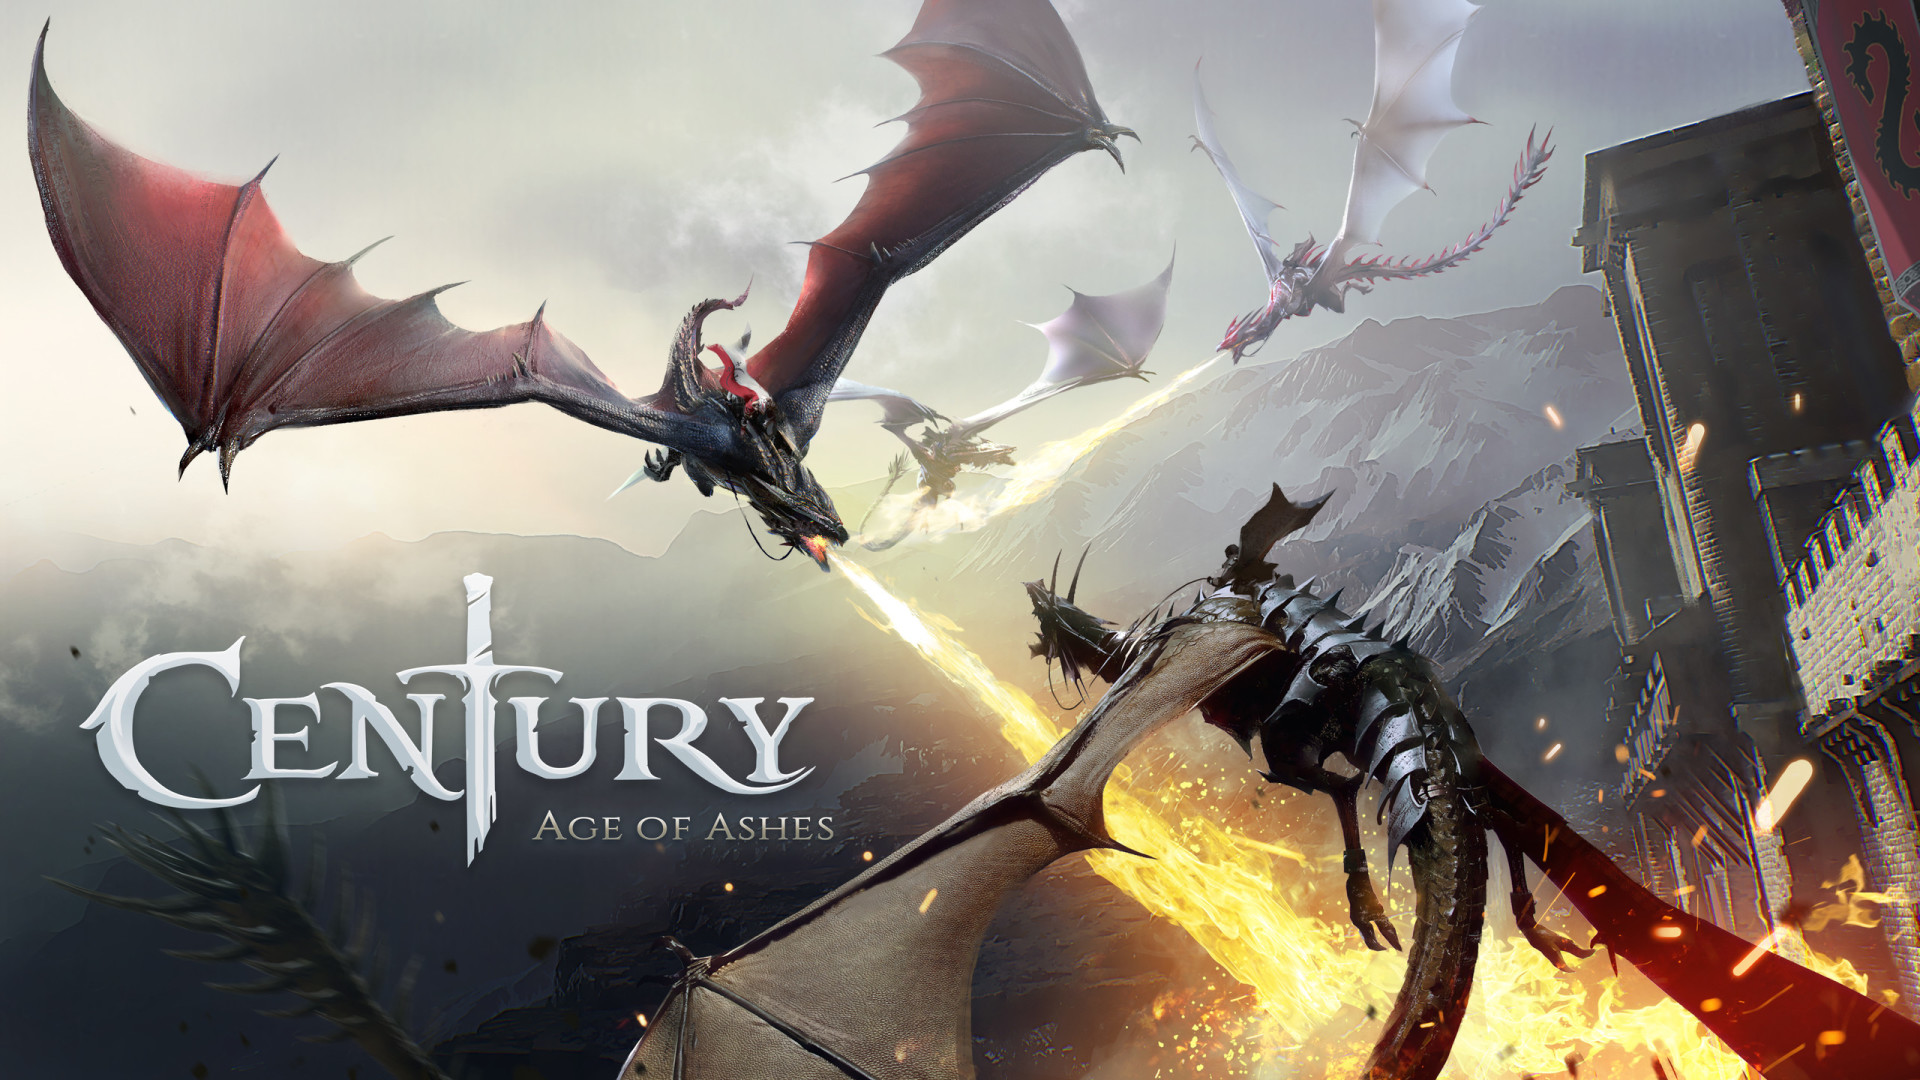 century: age of ashes release